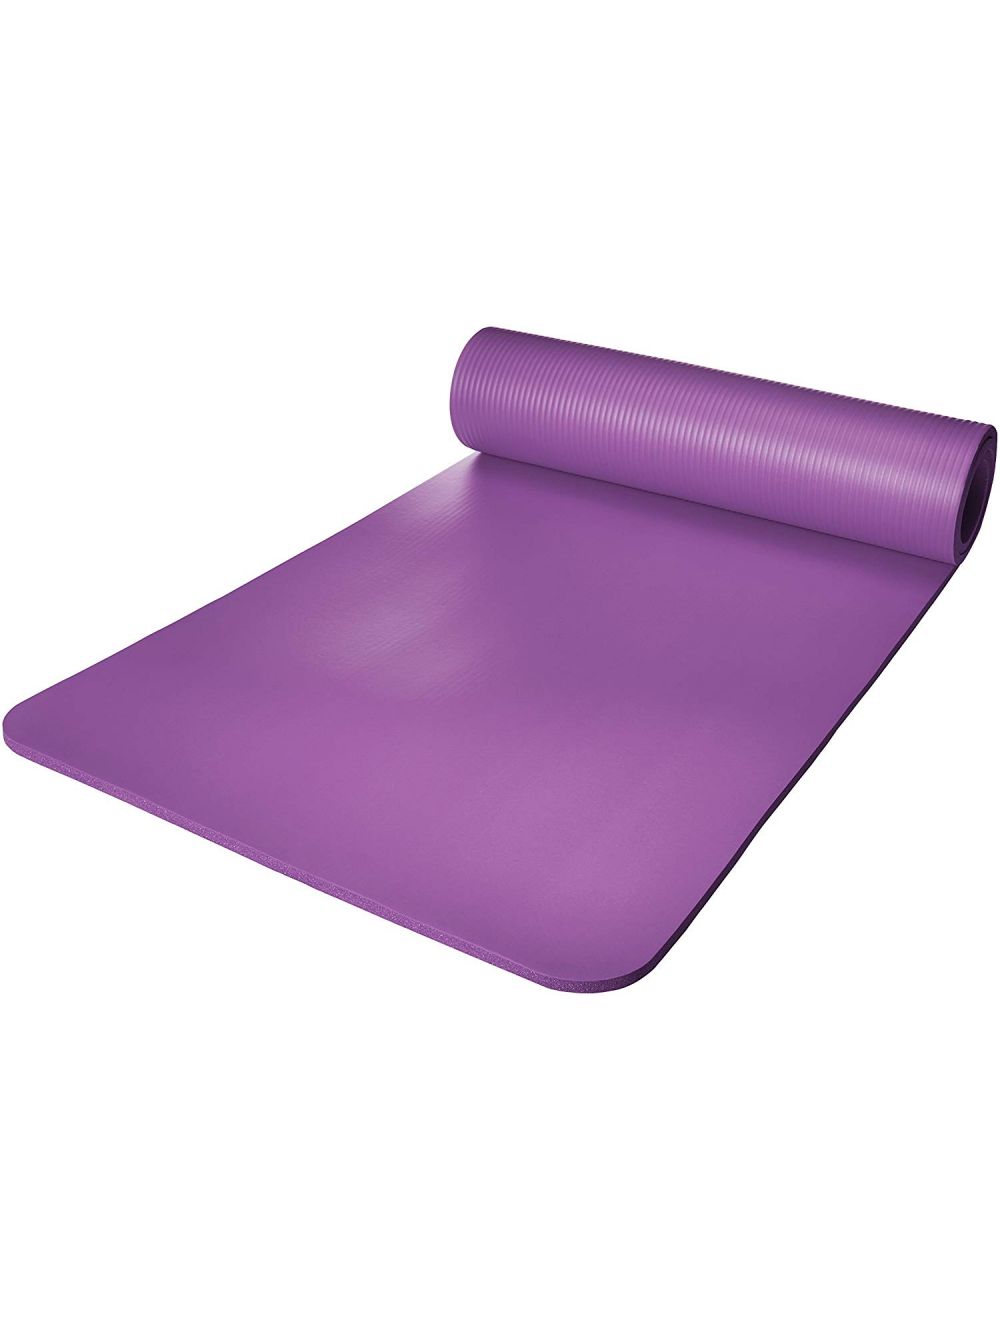 1/2-Inch Extra Thick High Density Anti-Tear Exercise NBR Yoga Mat